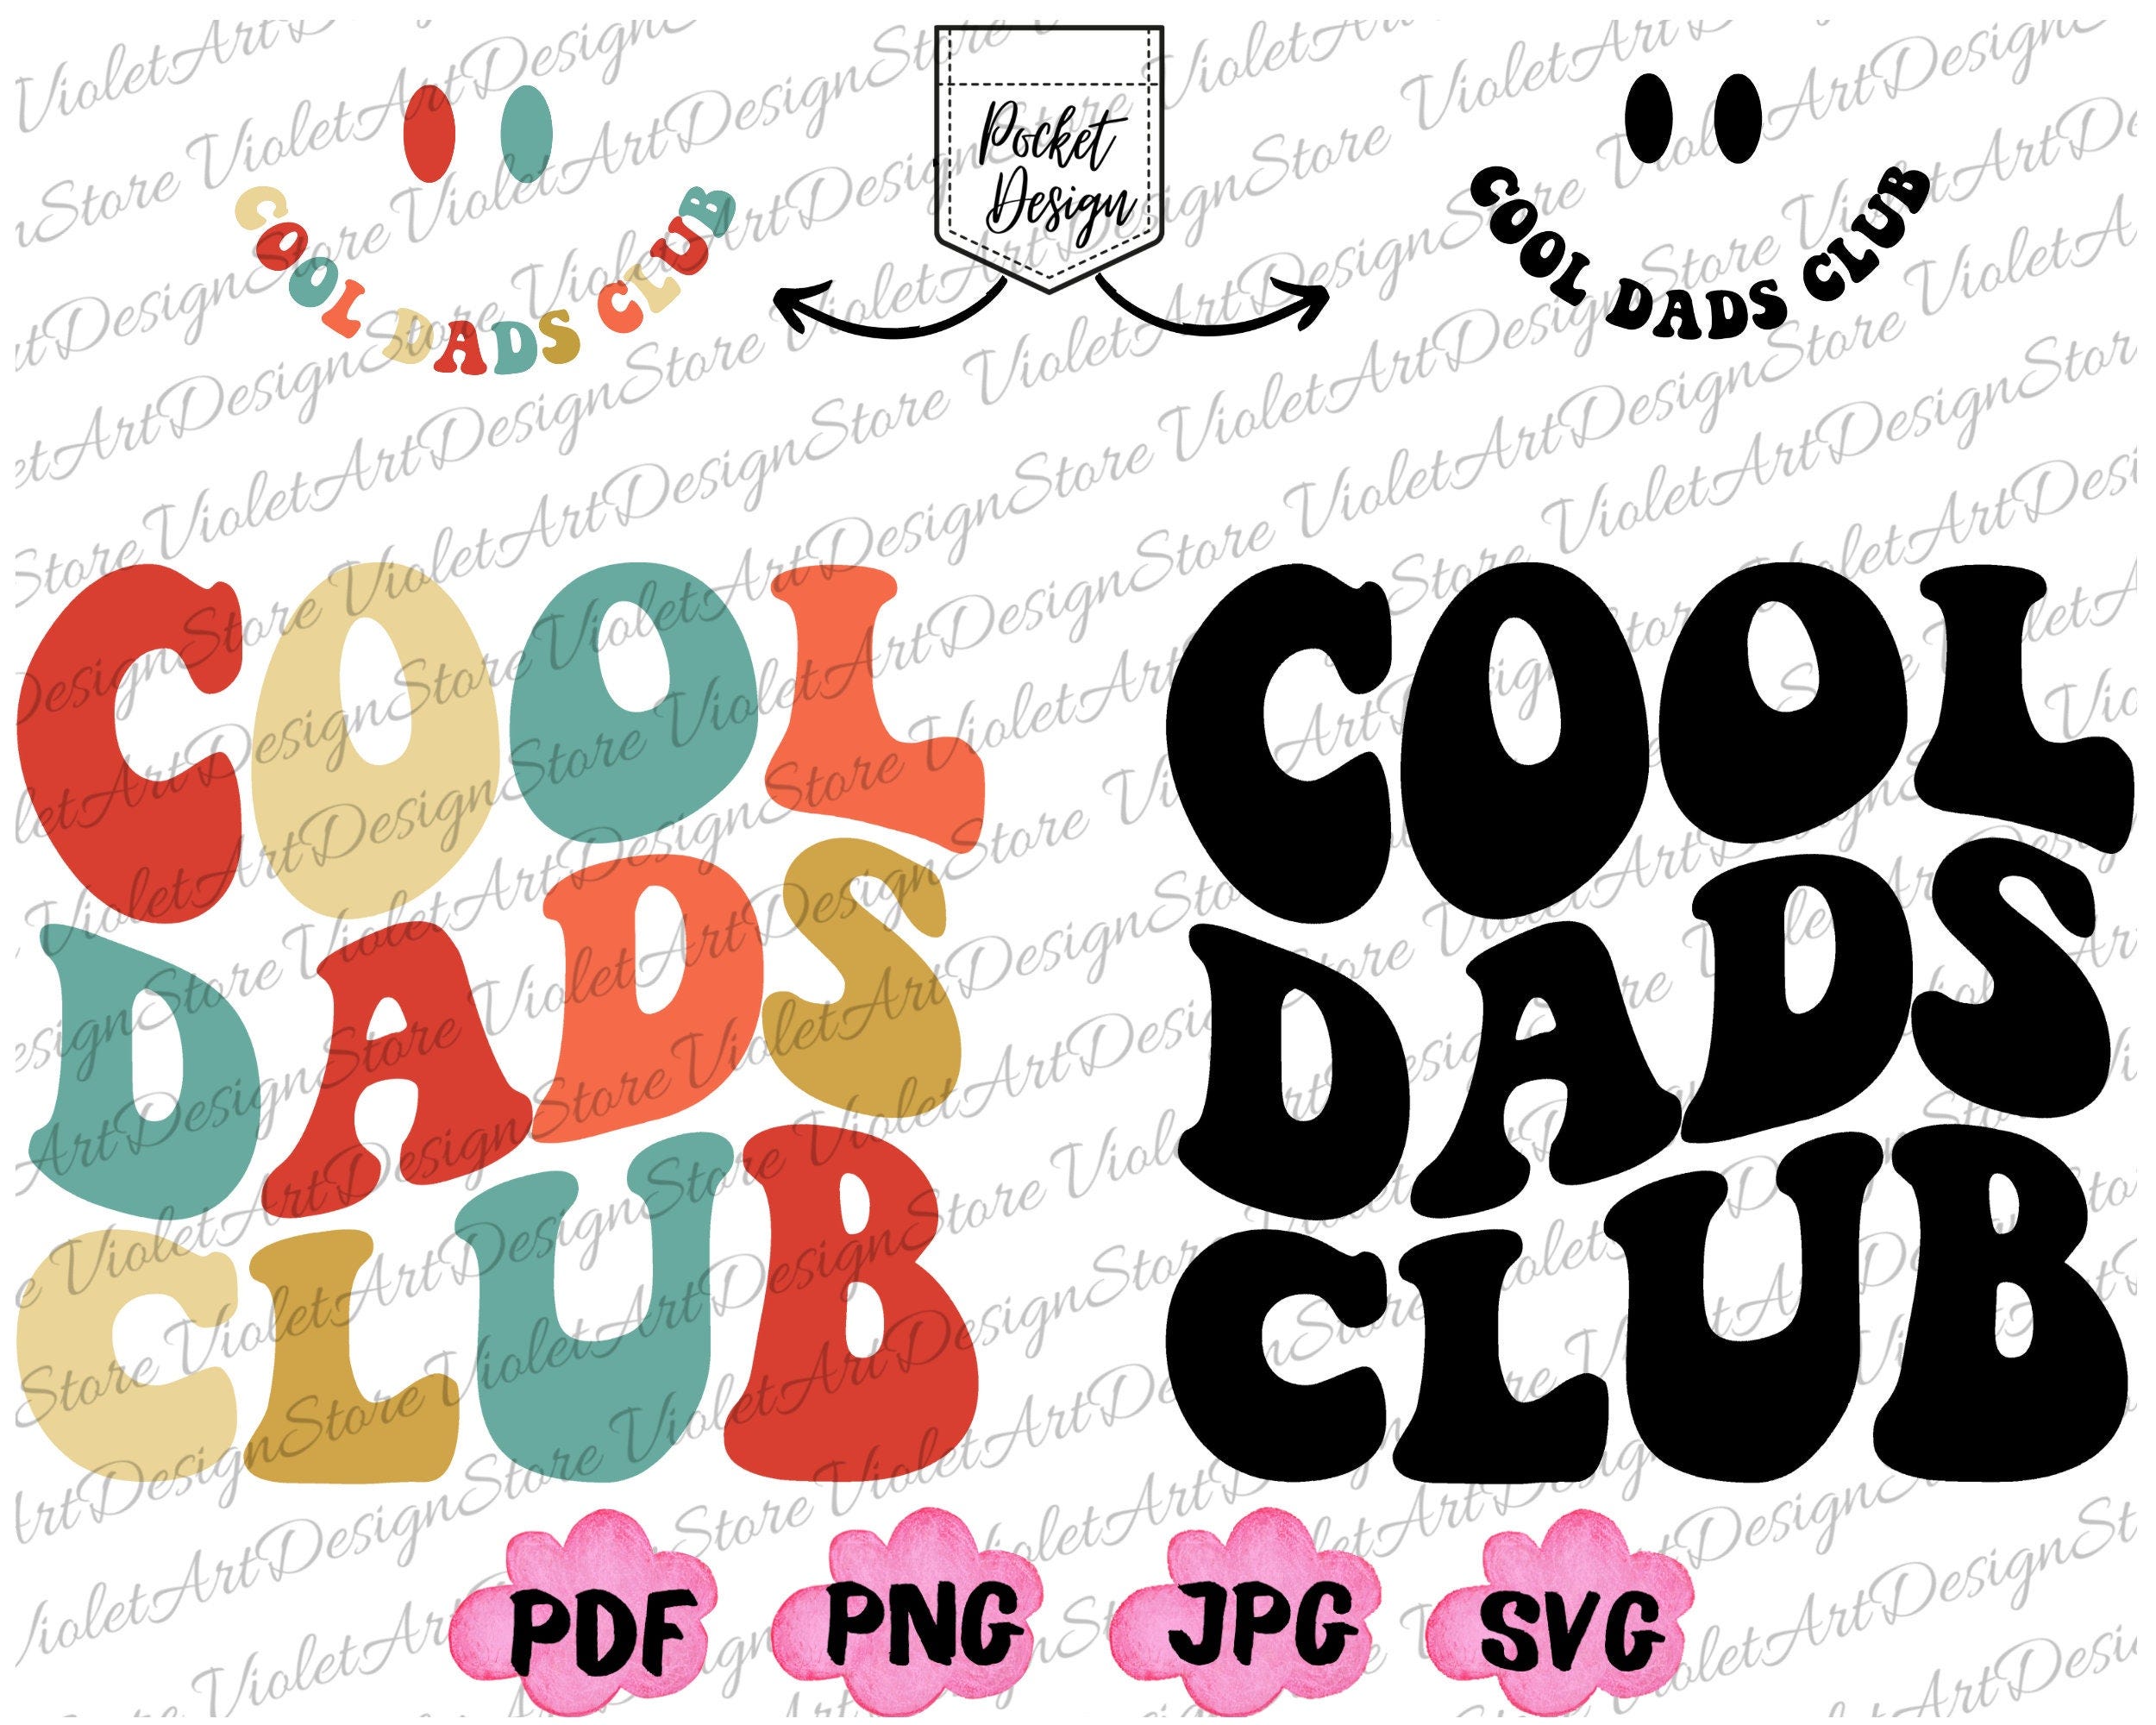 Cool Dads Club Png Svg, Cool Dads Club Svg, Retro Daddy Png, Dad Png, Daddy Png, Dad Svg, Cool Dads Club, Gift for Dad